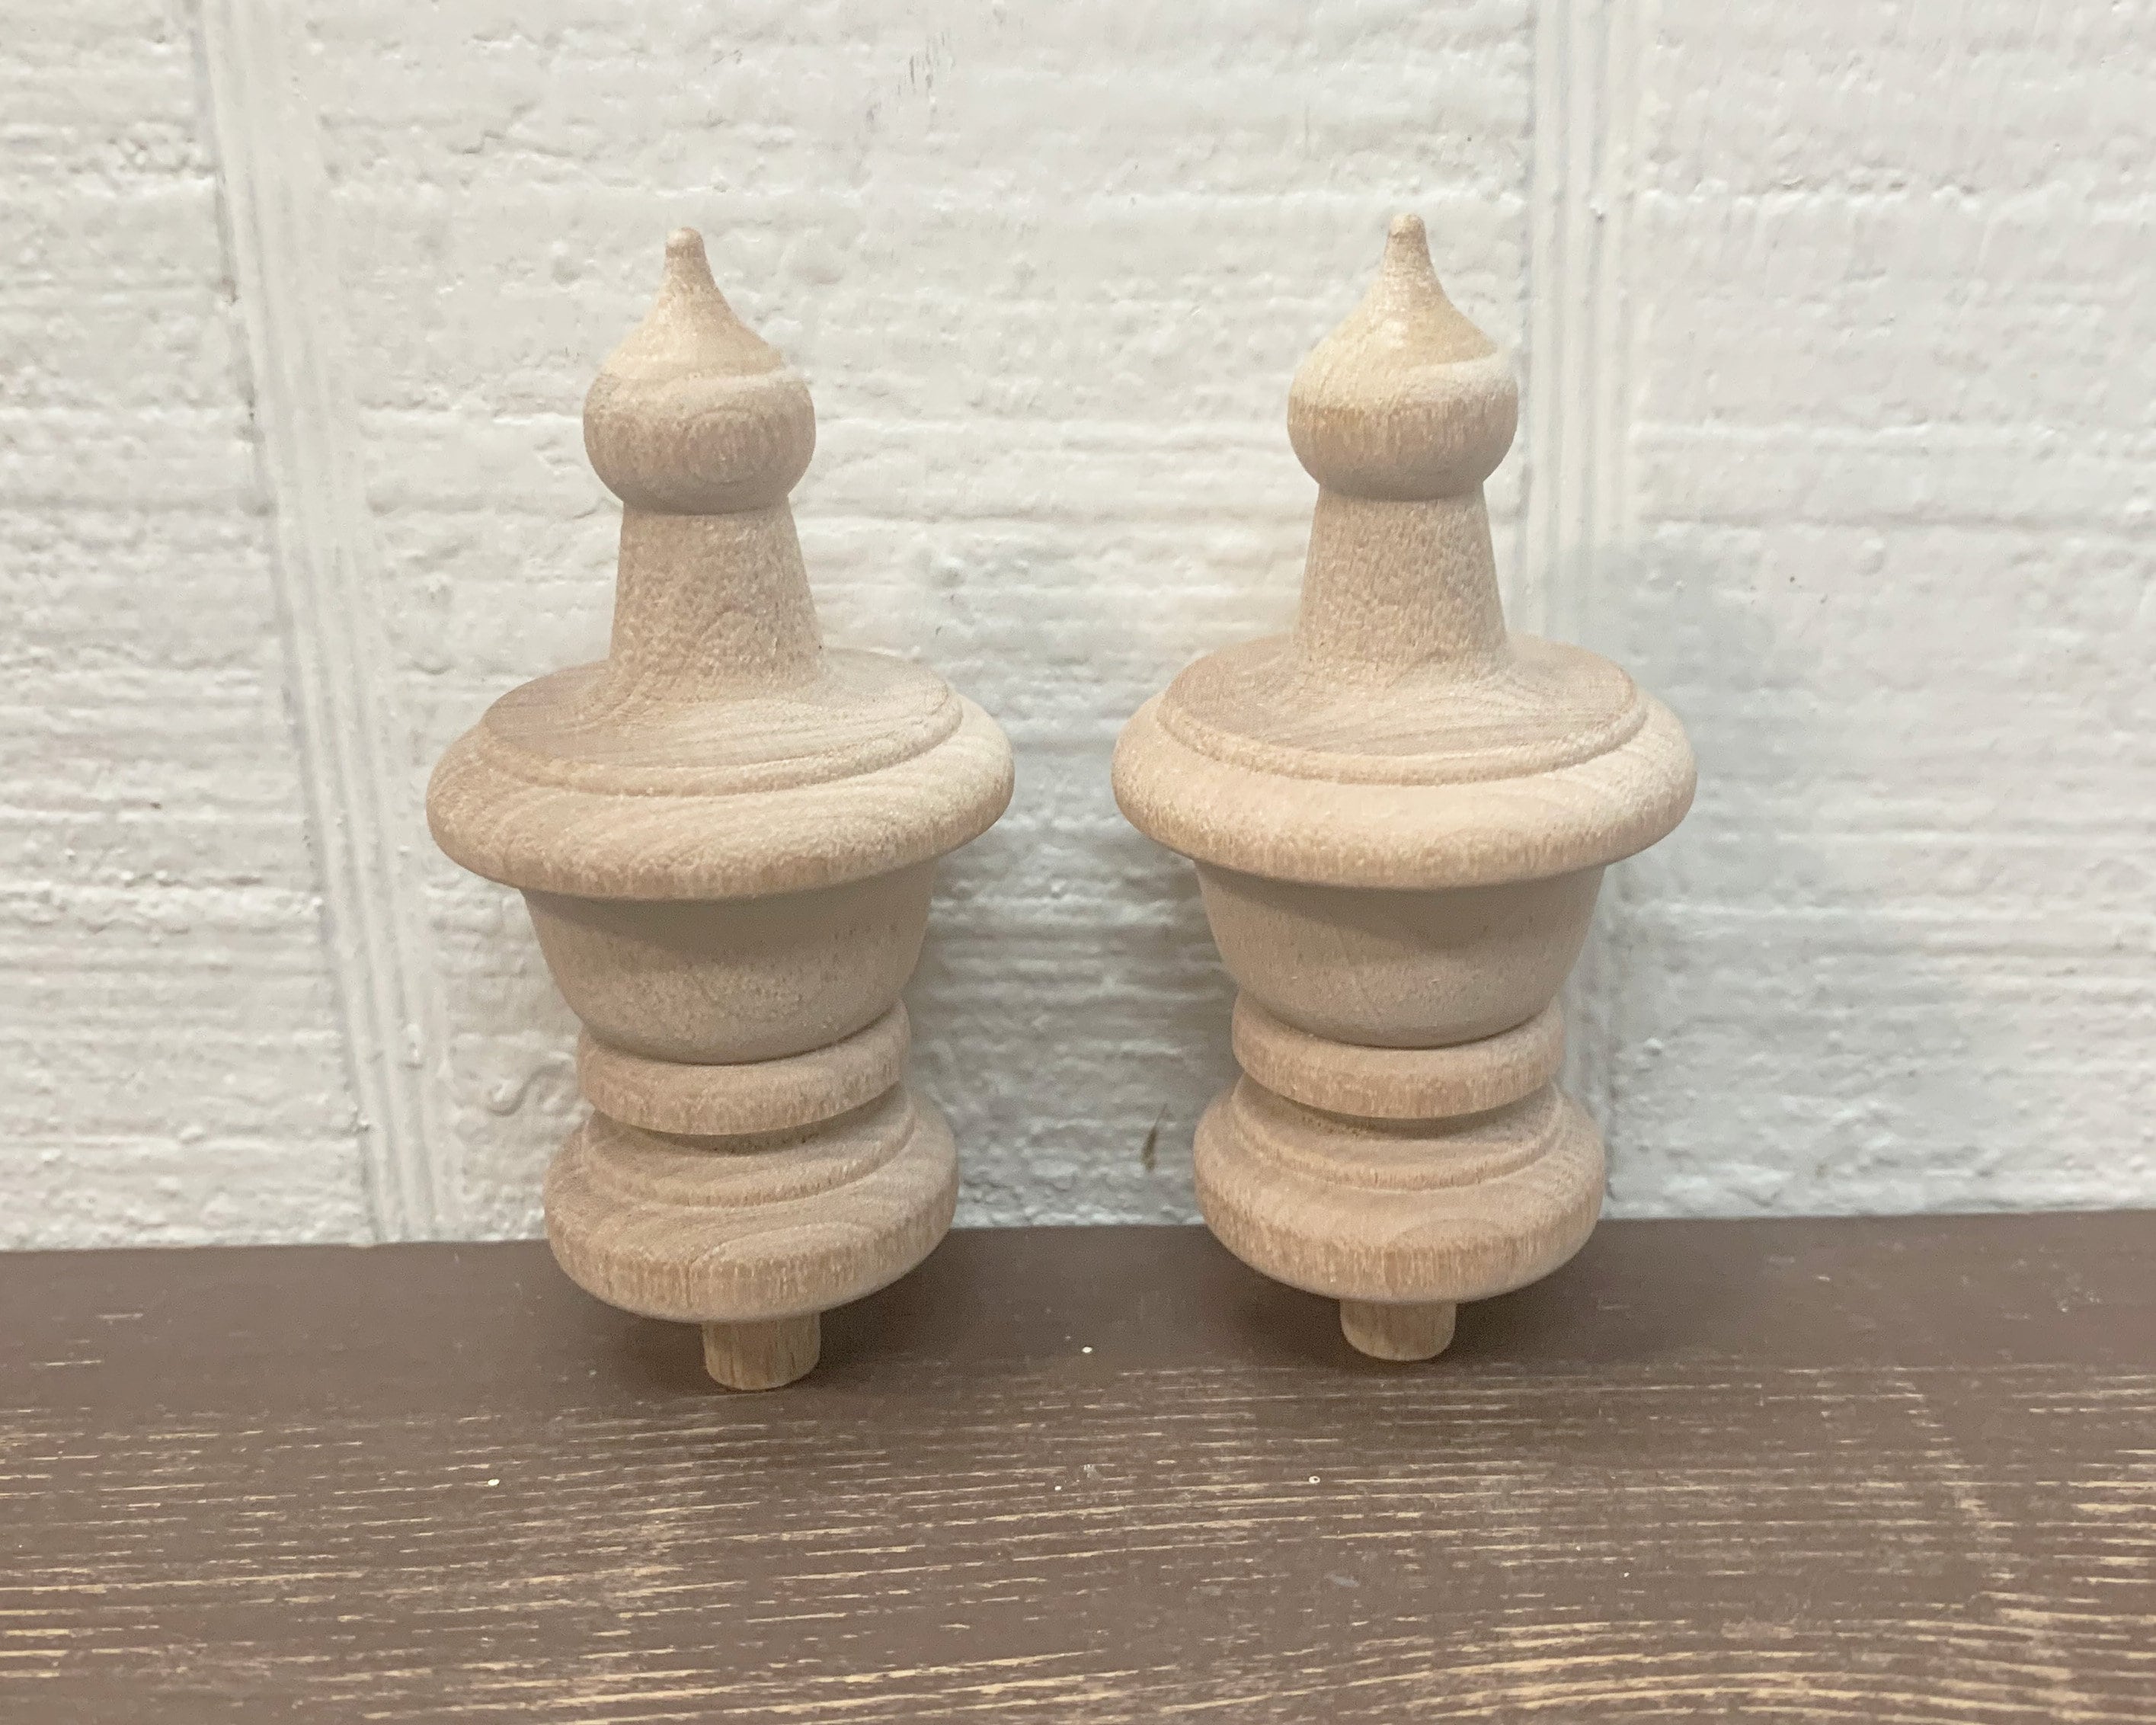 CTW Home 510671 4 Dia. x 10 in. Turned Wood Finials - Set of 2